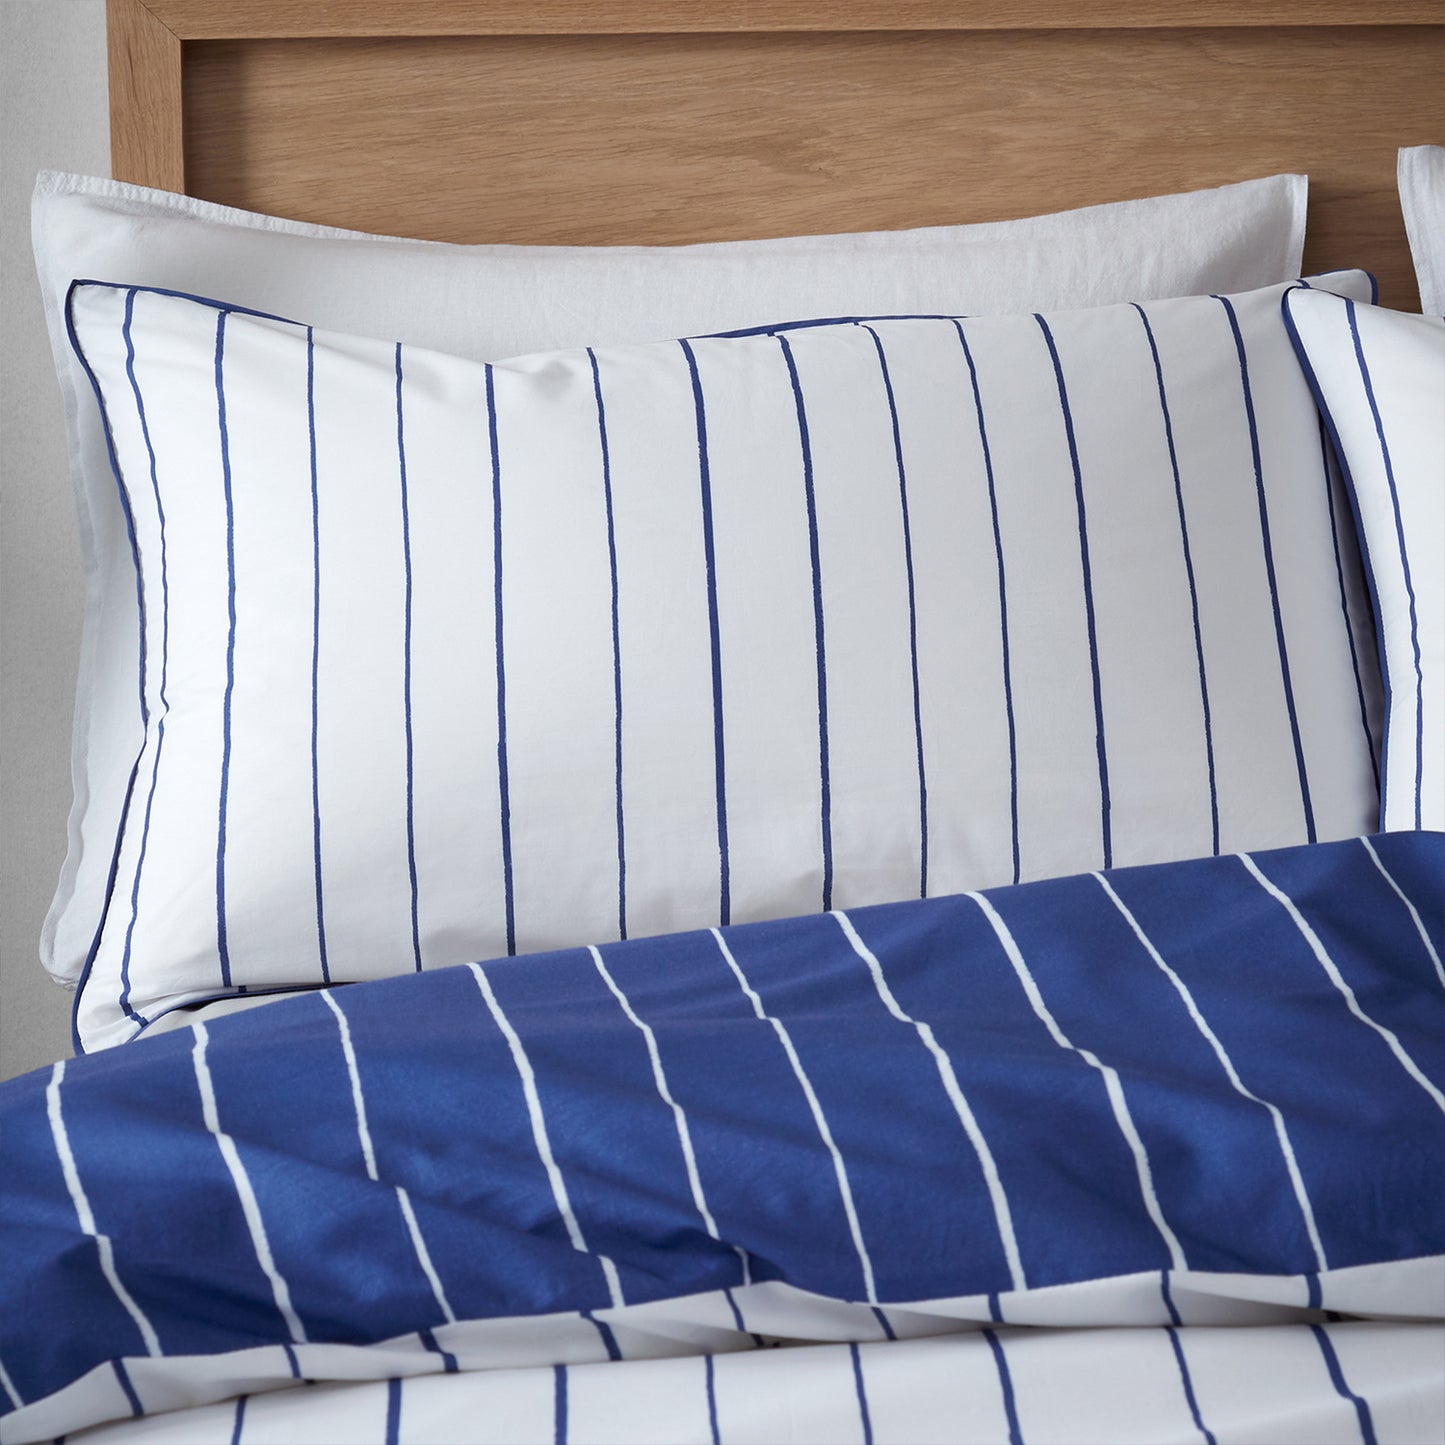 Content By Terence Conran Hastings Stripe Cotton Duvet Set